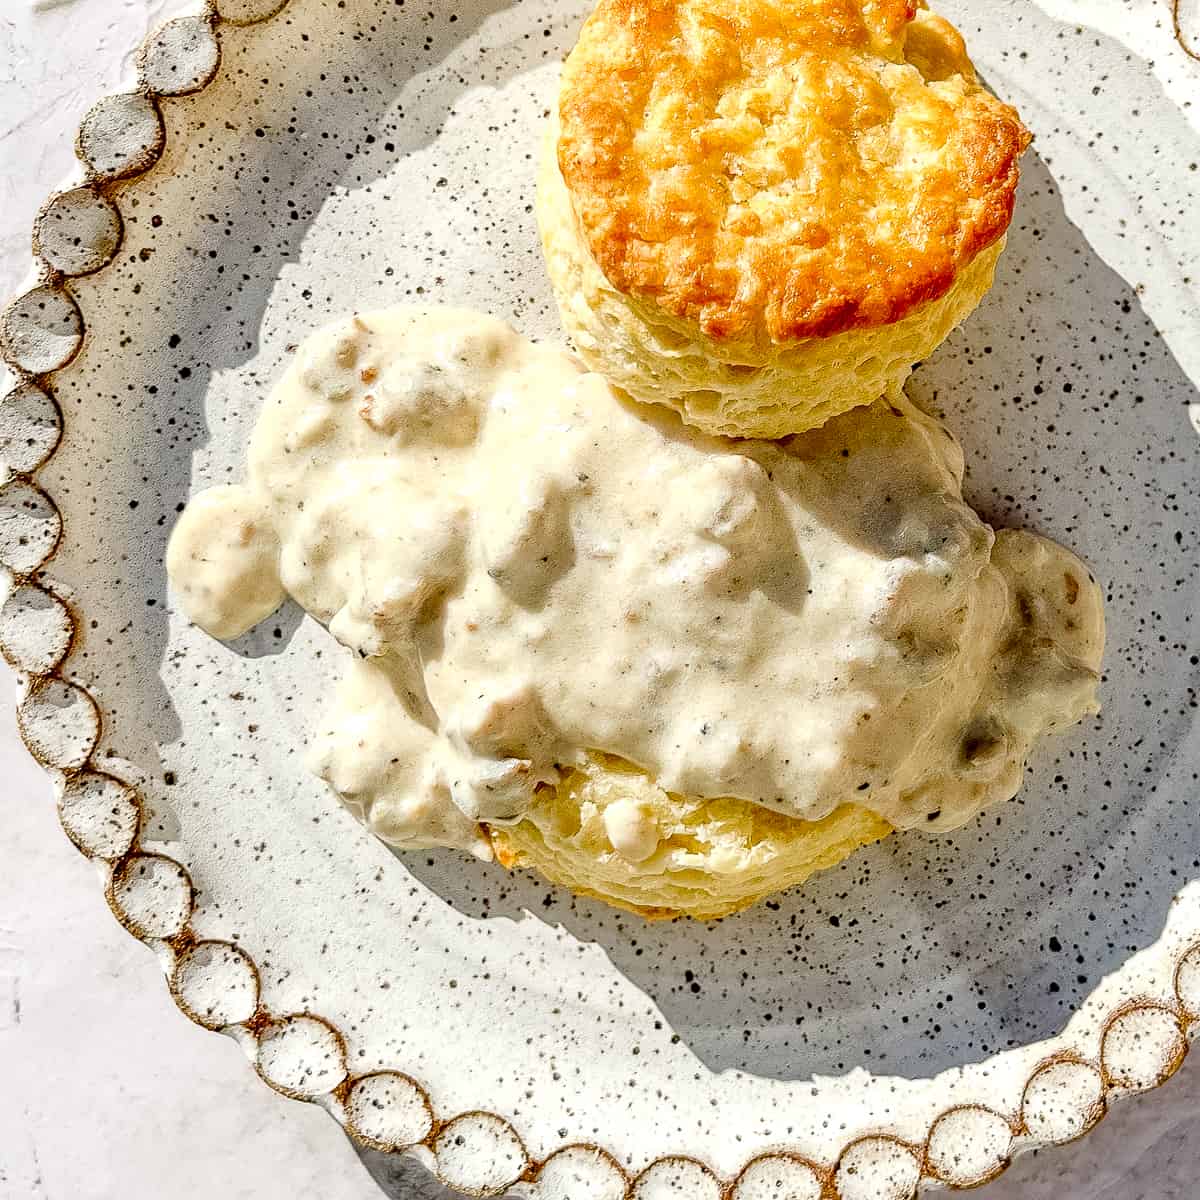 closeup of sausage gravy on a biscuit on a speckled white plate.